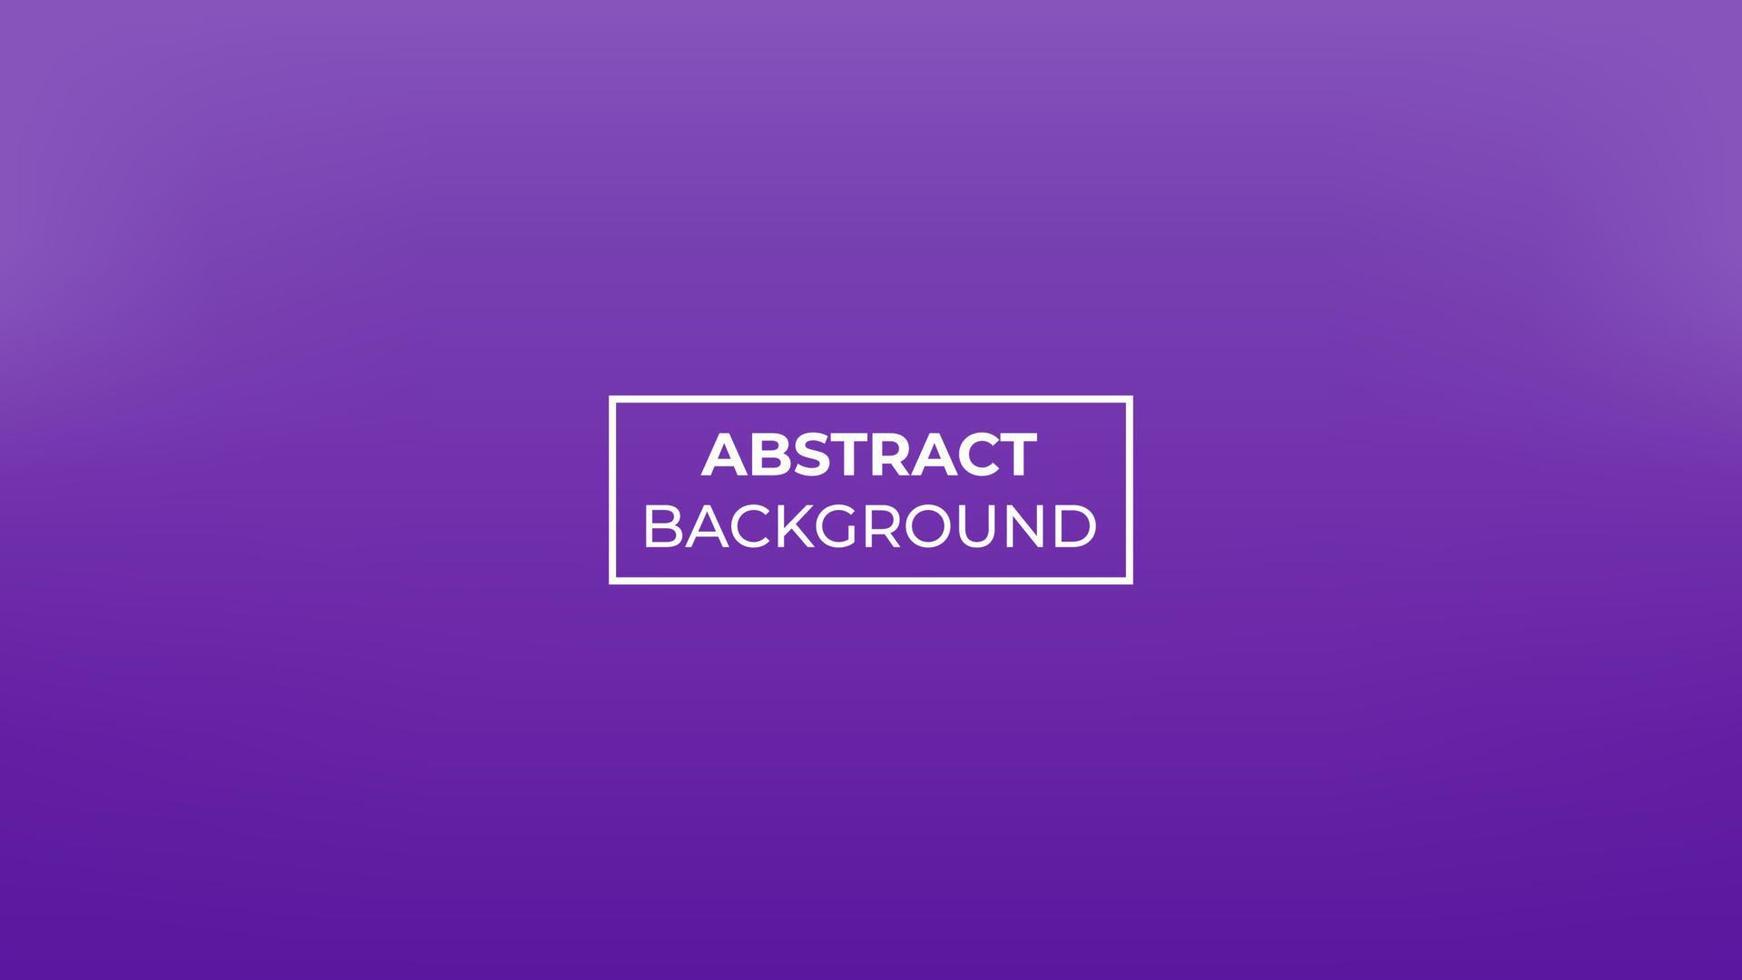 Abstract background mixed dark purple and white into one, easy to edit vector